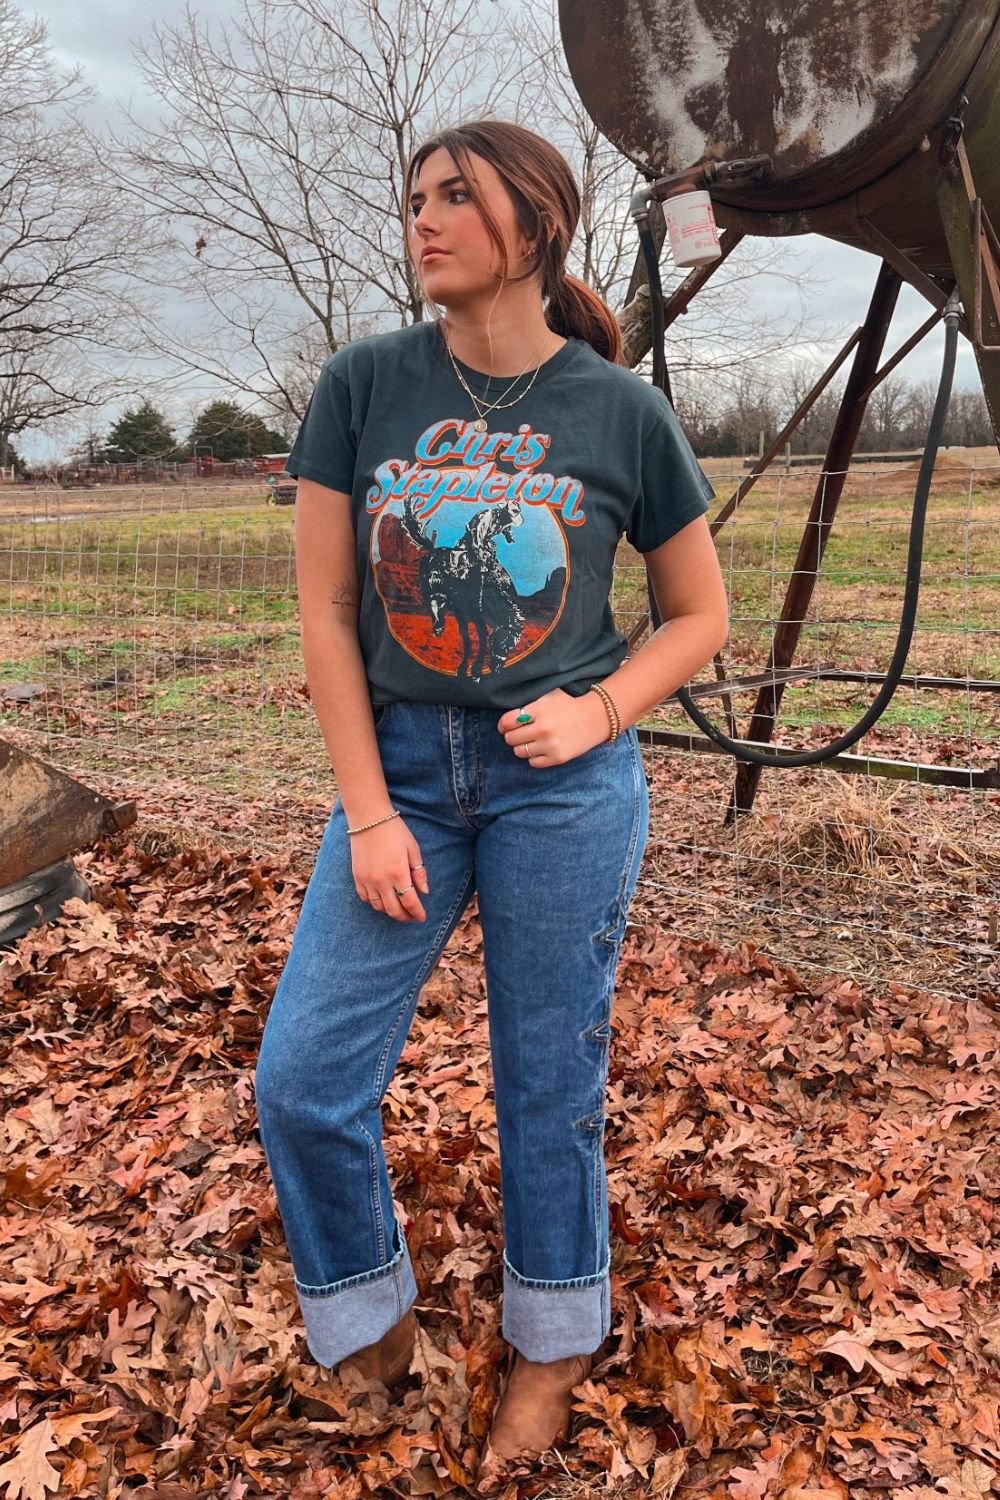 Daydreamer Graphic Tee | Chris Stapleton | Horse Canyons Tour Tee - Women's Shirts & Tops - Blooming Daily